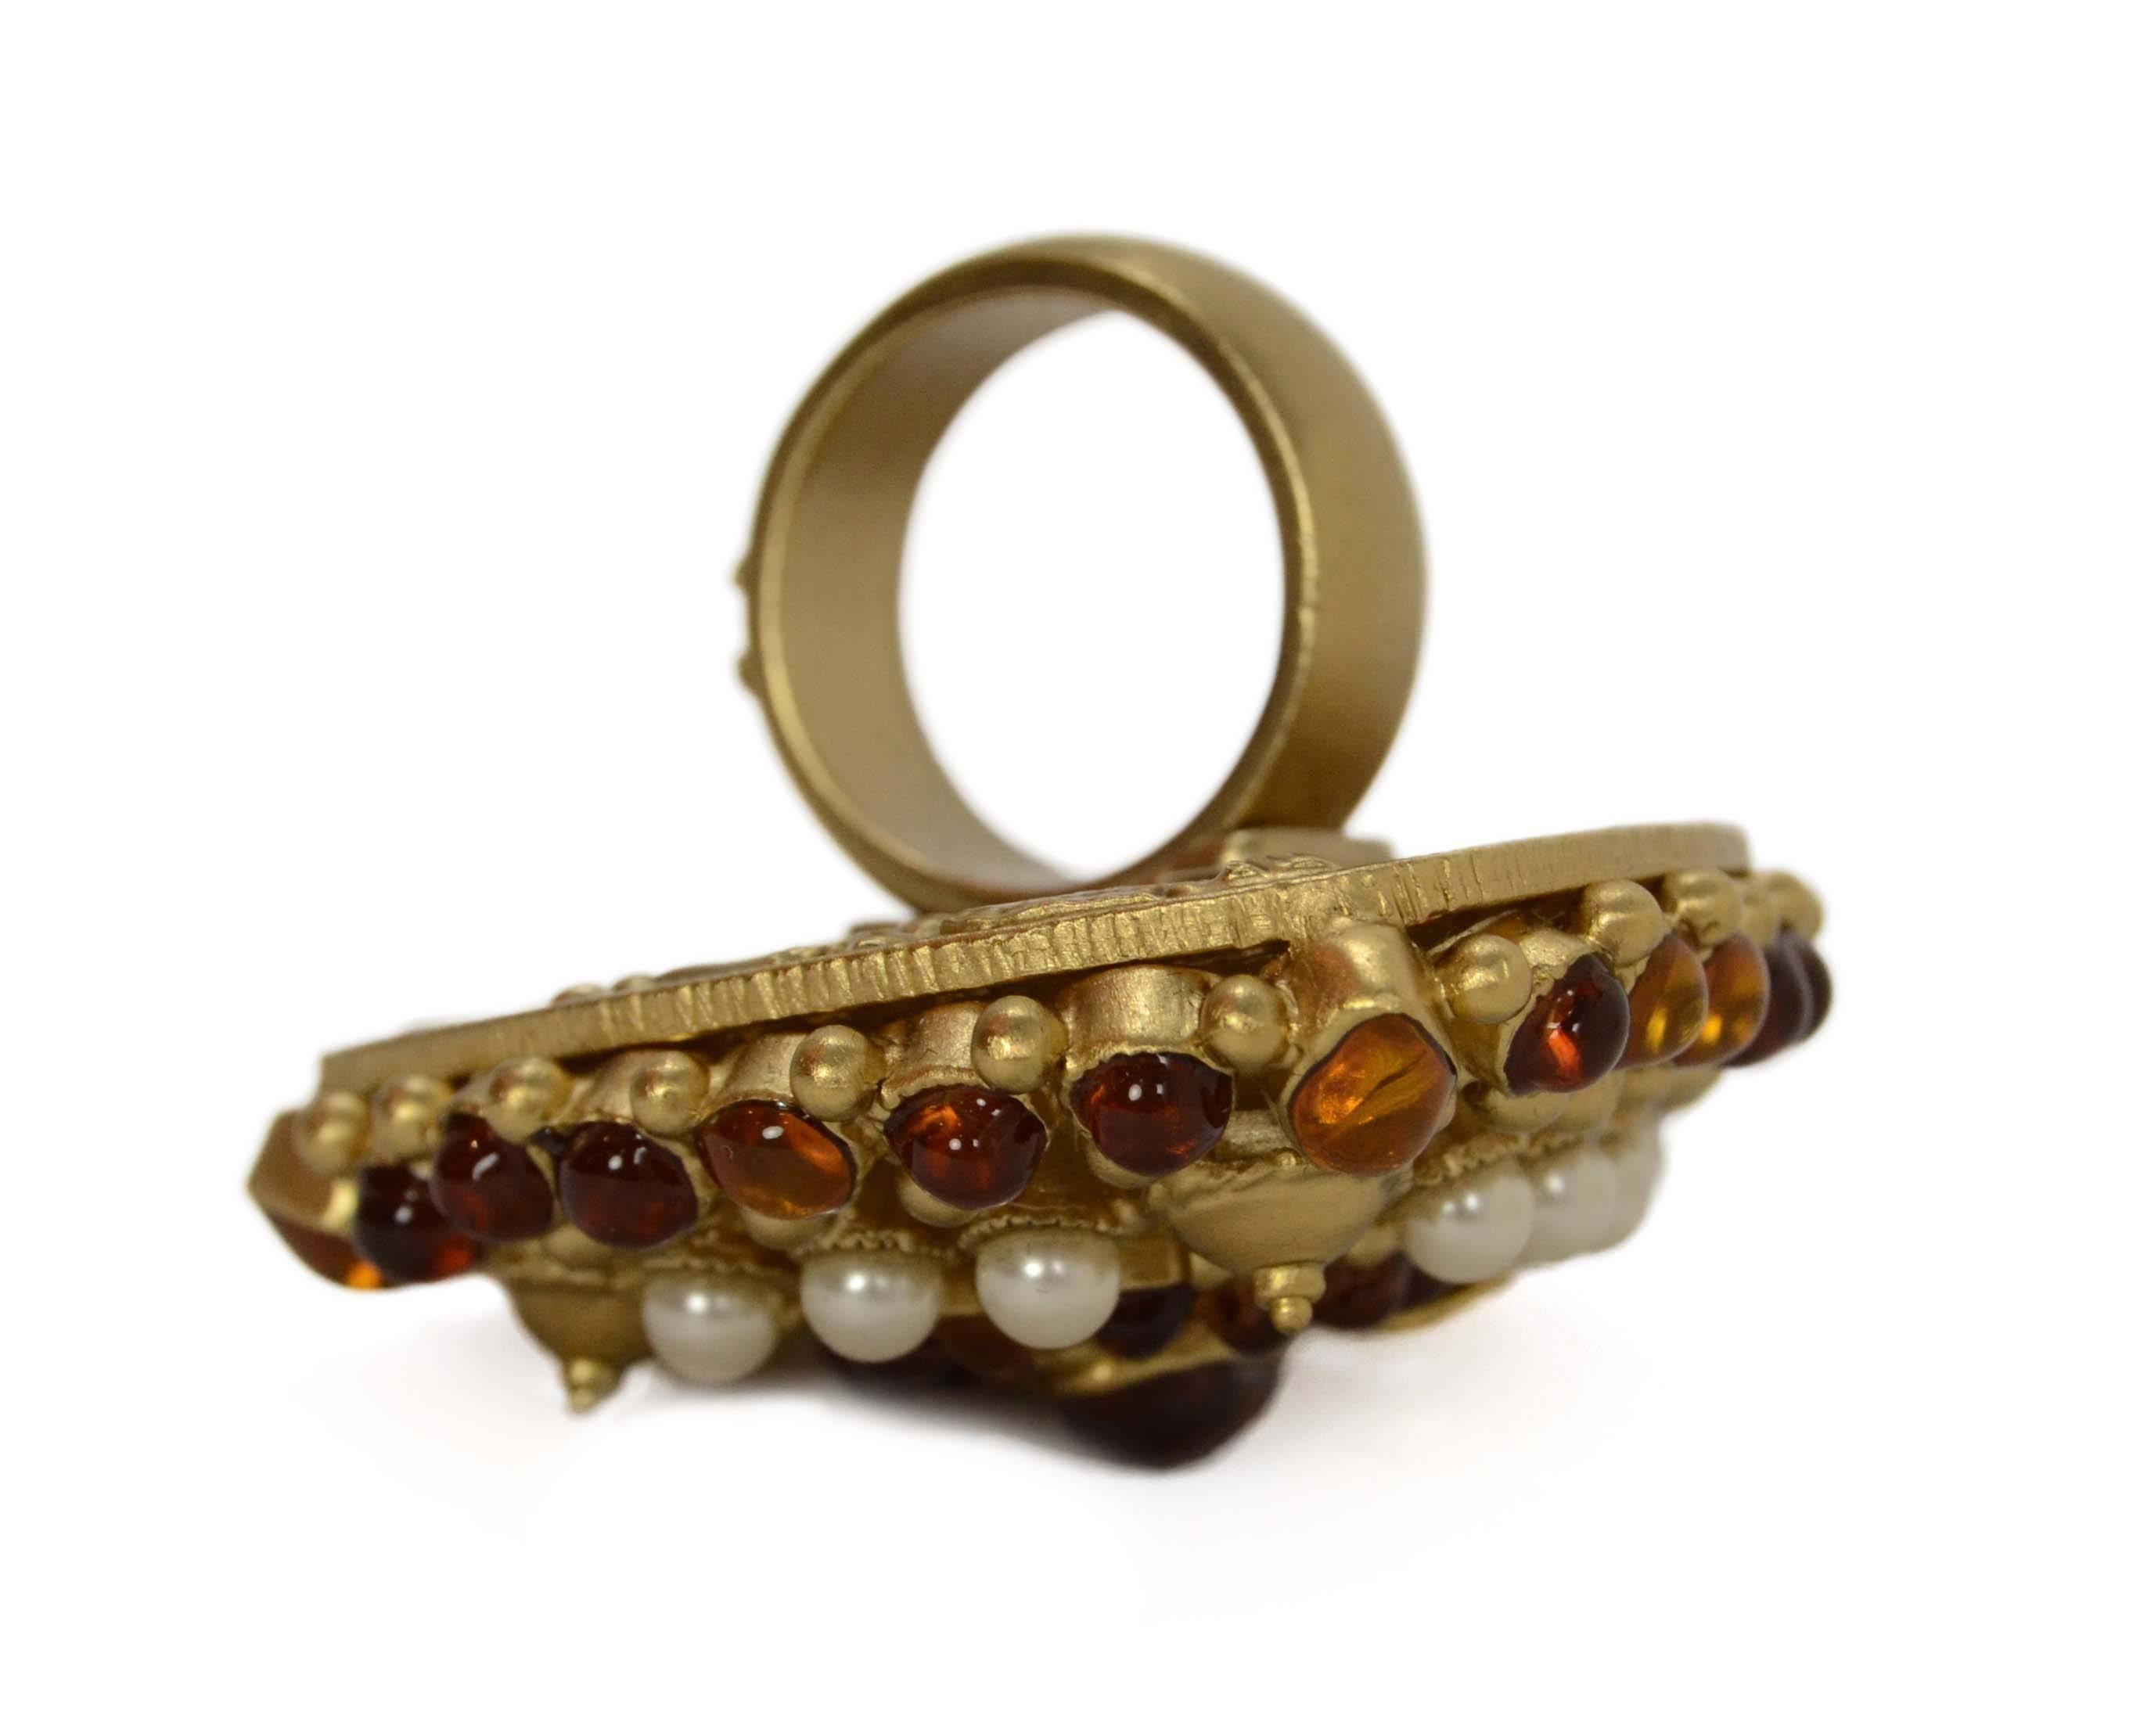 Chanel Amber & Ivory Oversized Cocktail Ring  
Features goldtone CC detailing in center
Made In: France
Year of Production: 2011
Color: Goldtone, ivory and amber
Materials: Glass, faux pearls and metal
Closure: None
Stamp: A11 CC